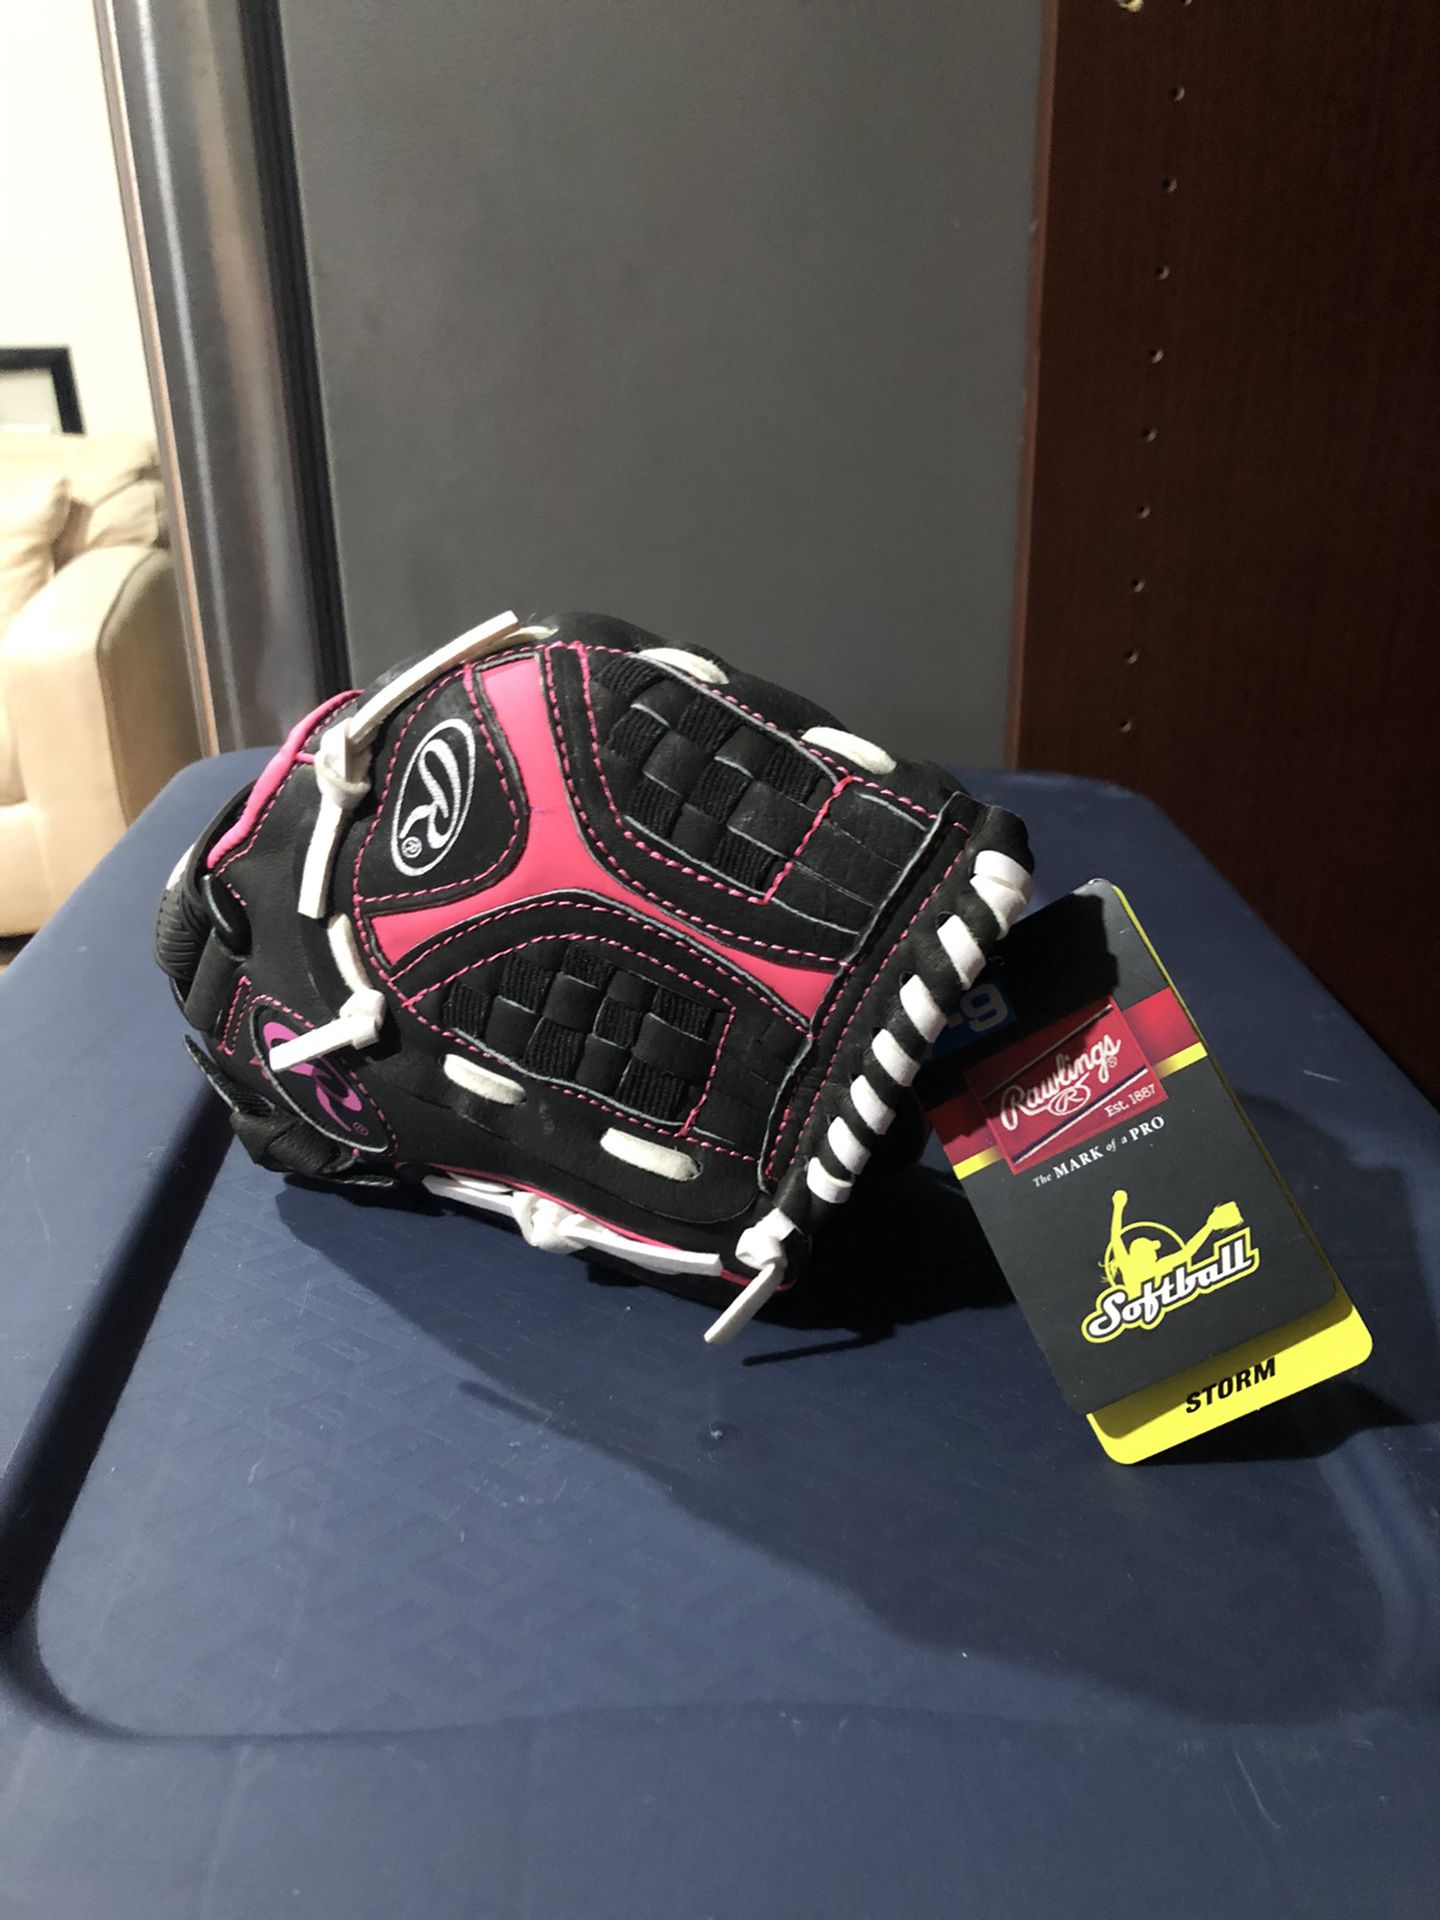 RAWLINGS Storm Youth Softball Glove 10 1/2 in